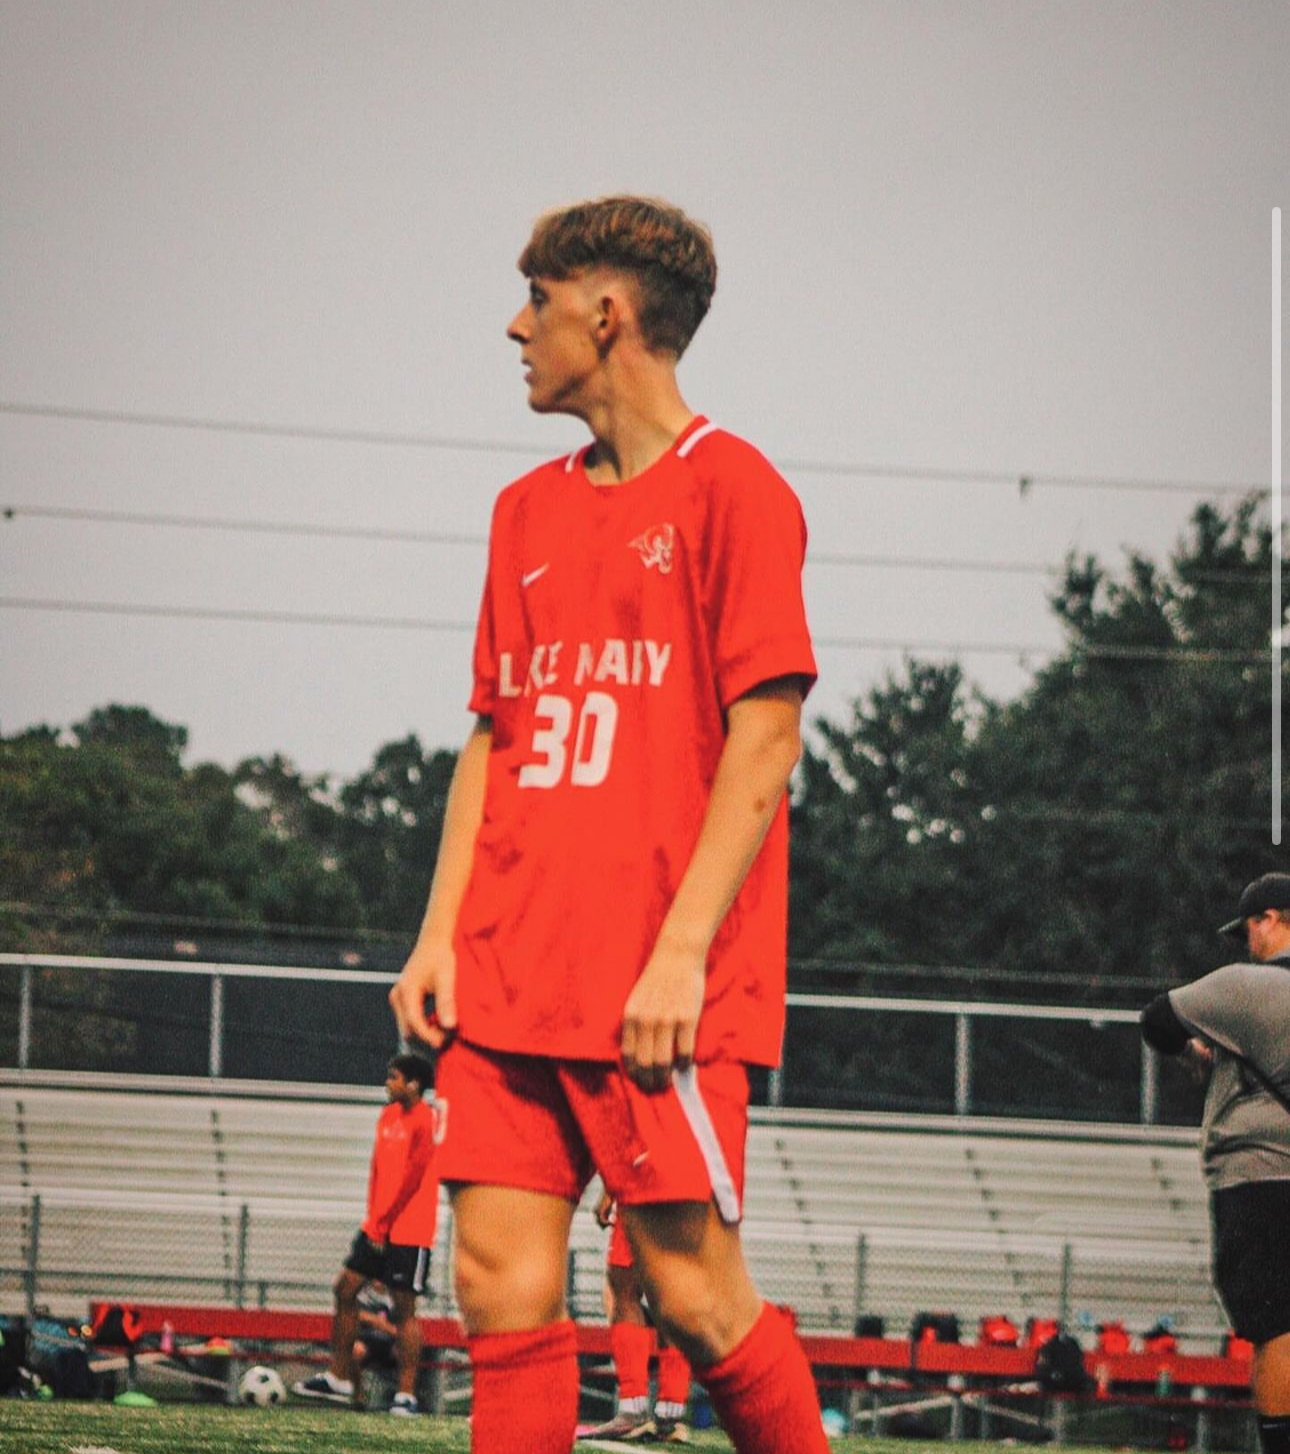 Exclusive Interview with Lake Mary High School’s Soccer Star, Aiden James